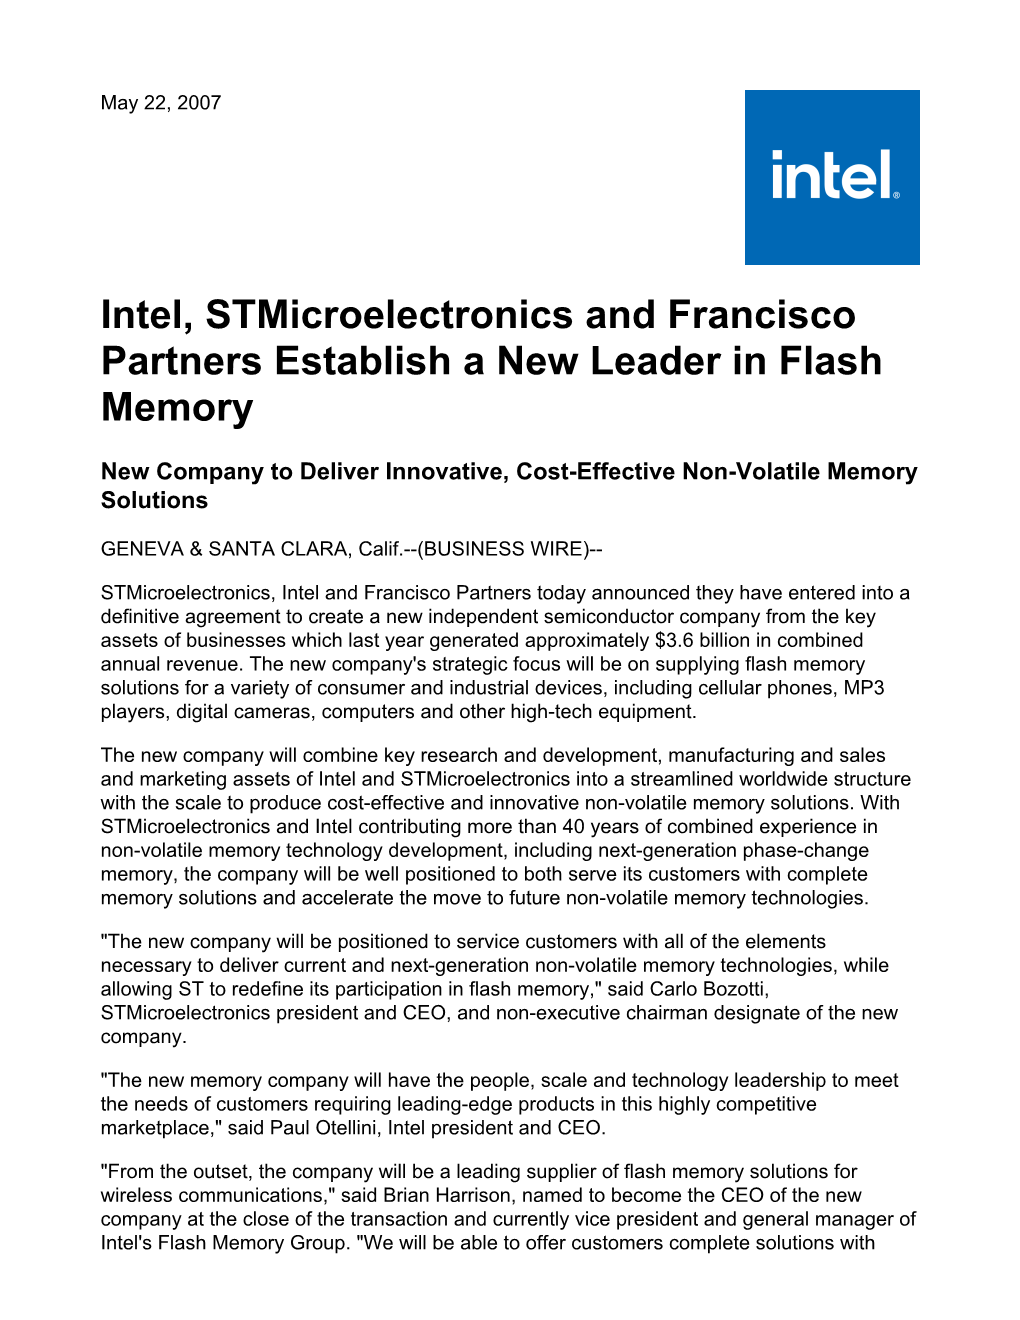 Intel, Stmicroelectronics and Francisco Partners Establish a New Leader in Flash Memory